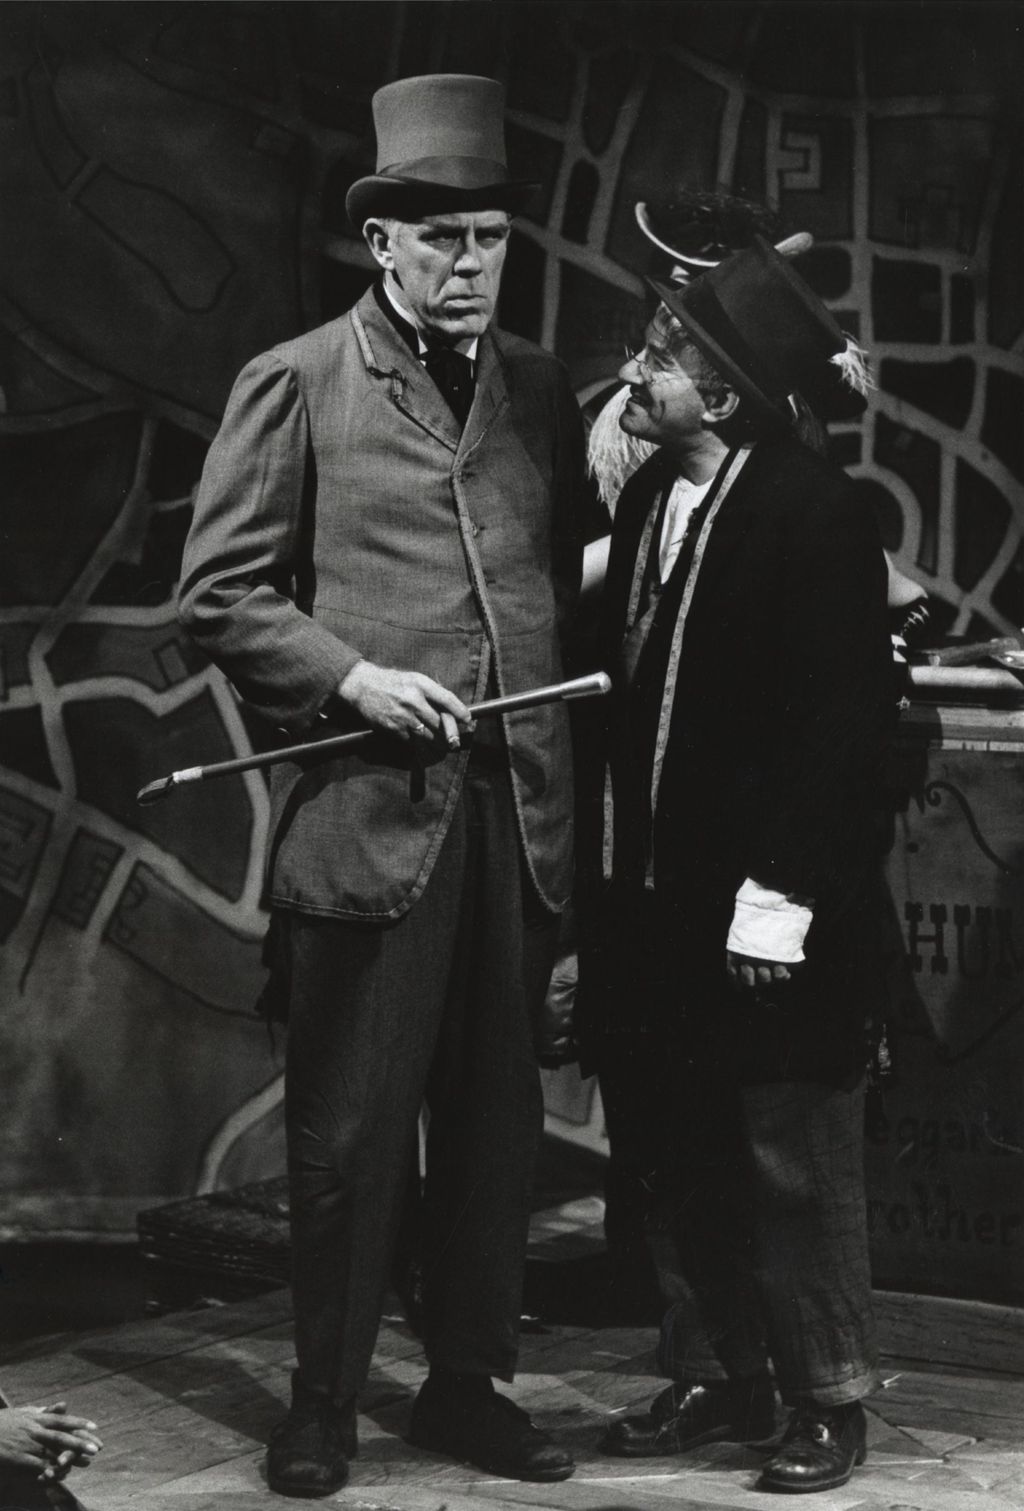 Tom Kelly and Franklyn Alexander on stage in a production of "The Threepenny Opera" at Hull-House Theater